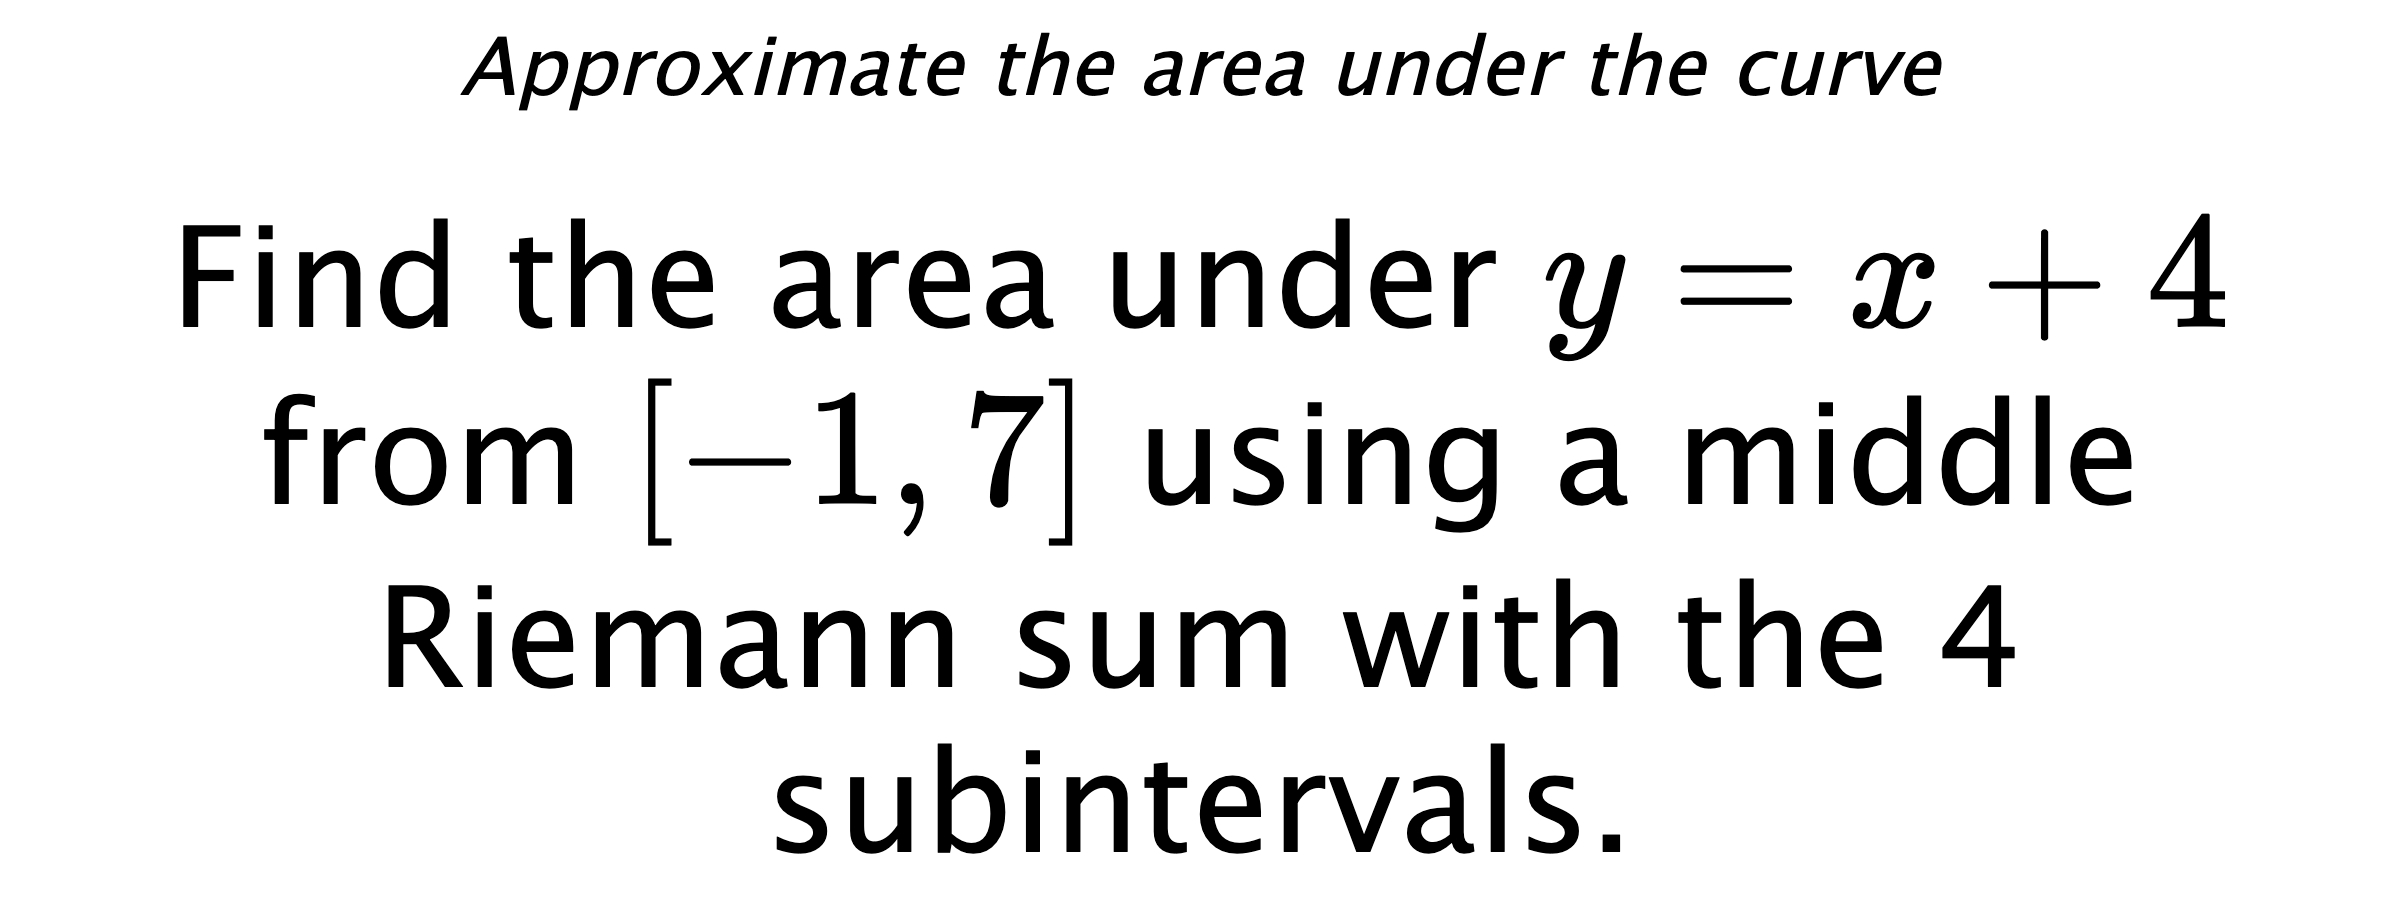 Approximate the area under the curve Find the area under $ y=x+4 $ from $ [-1,7] $ using a middle Riemann sum with the 4 subintervals.